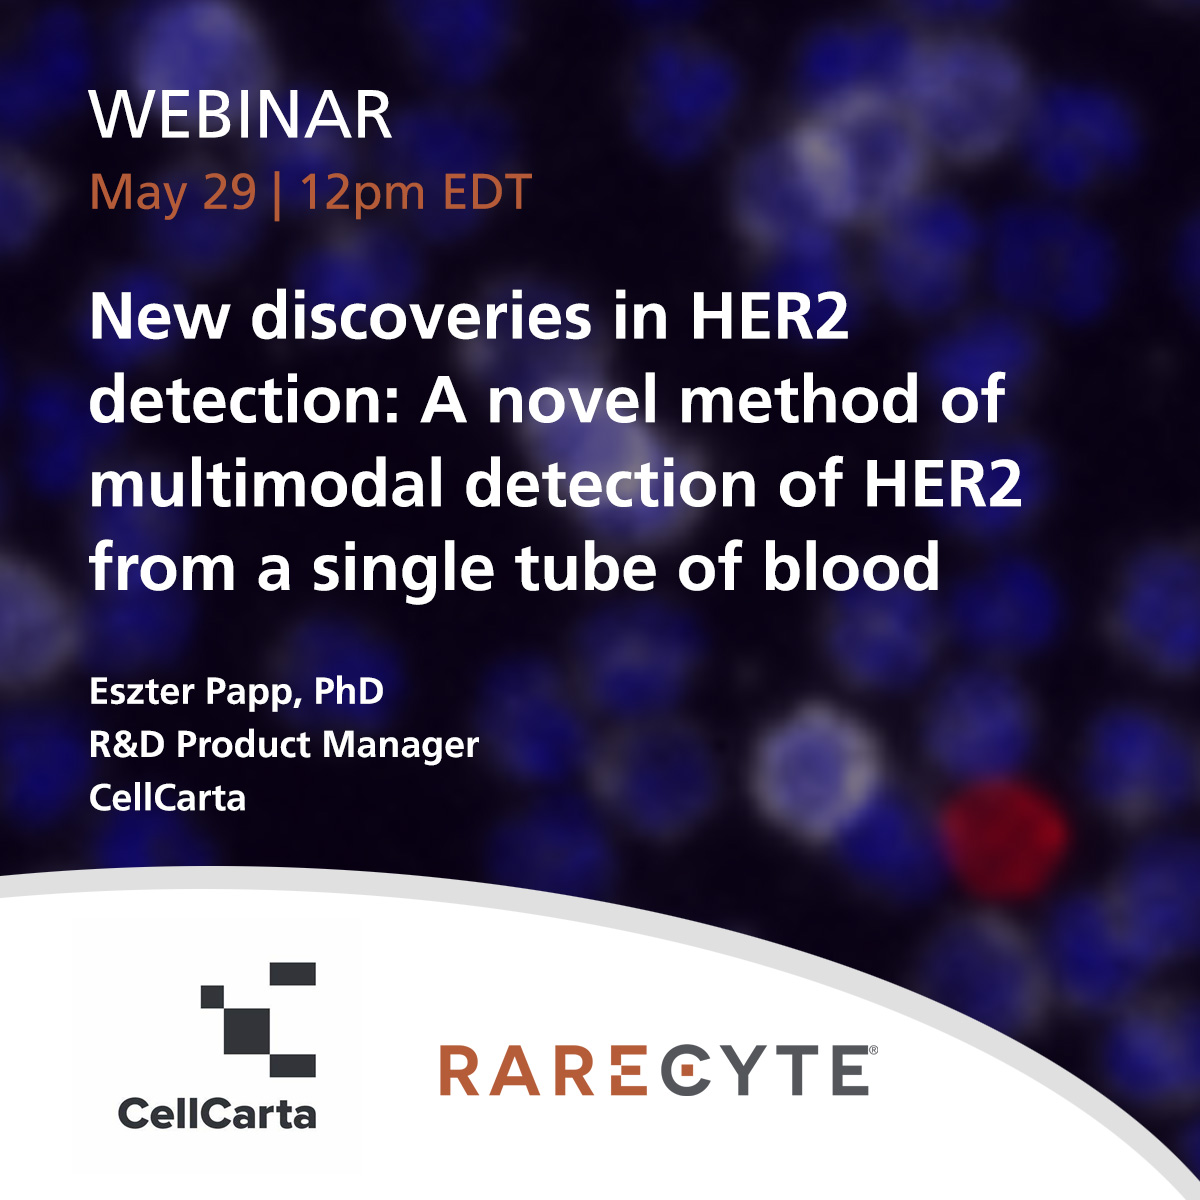 Can we detect HER2 expression from a single tube of blood? Attend this webinar to discover a novel method for oncosome detection using the RareCyte CTC platform. Register here, rarecyte.zoom.us/webinar/regist…

@CellCarta
#PrecisionMedicine #circulatingtumorcells #LiquidBiopsy #RareCyte